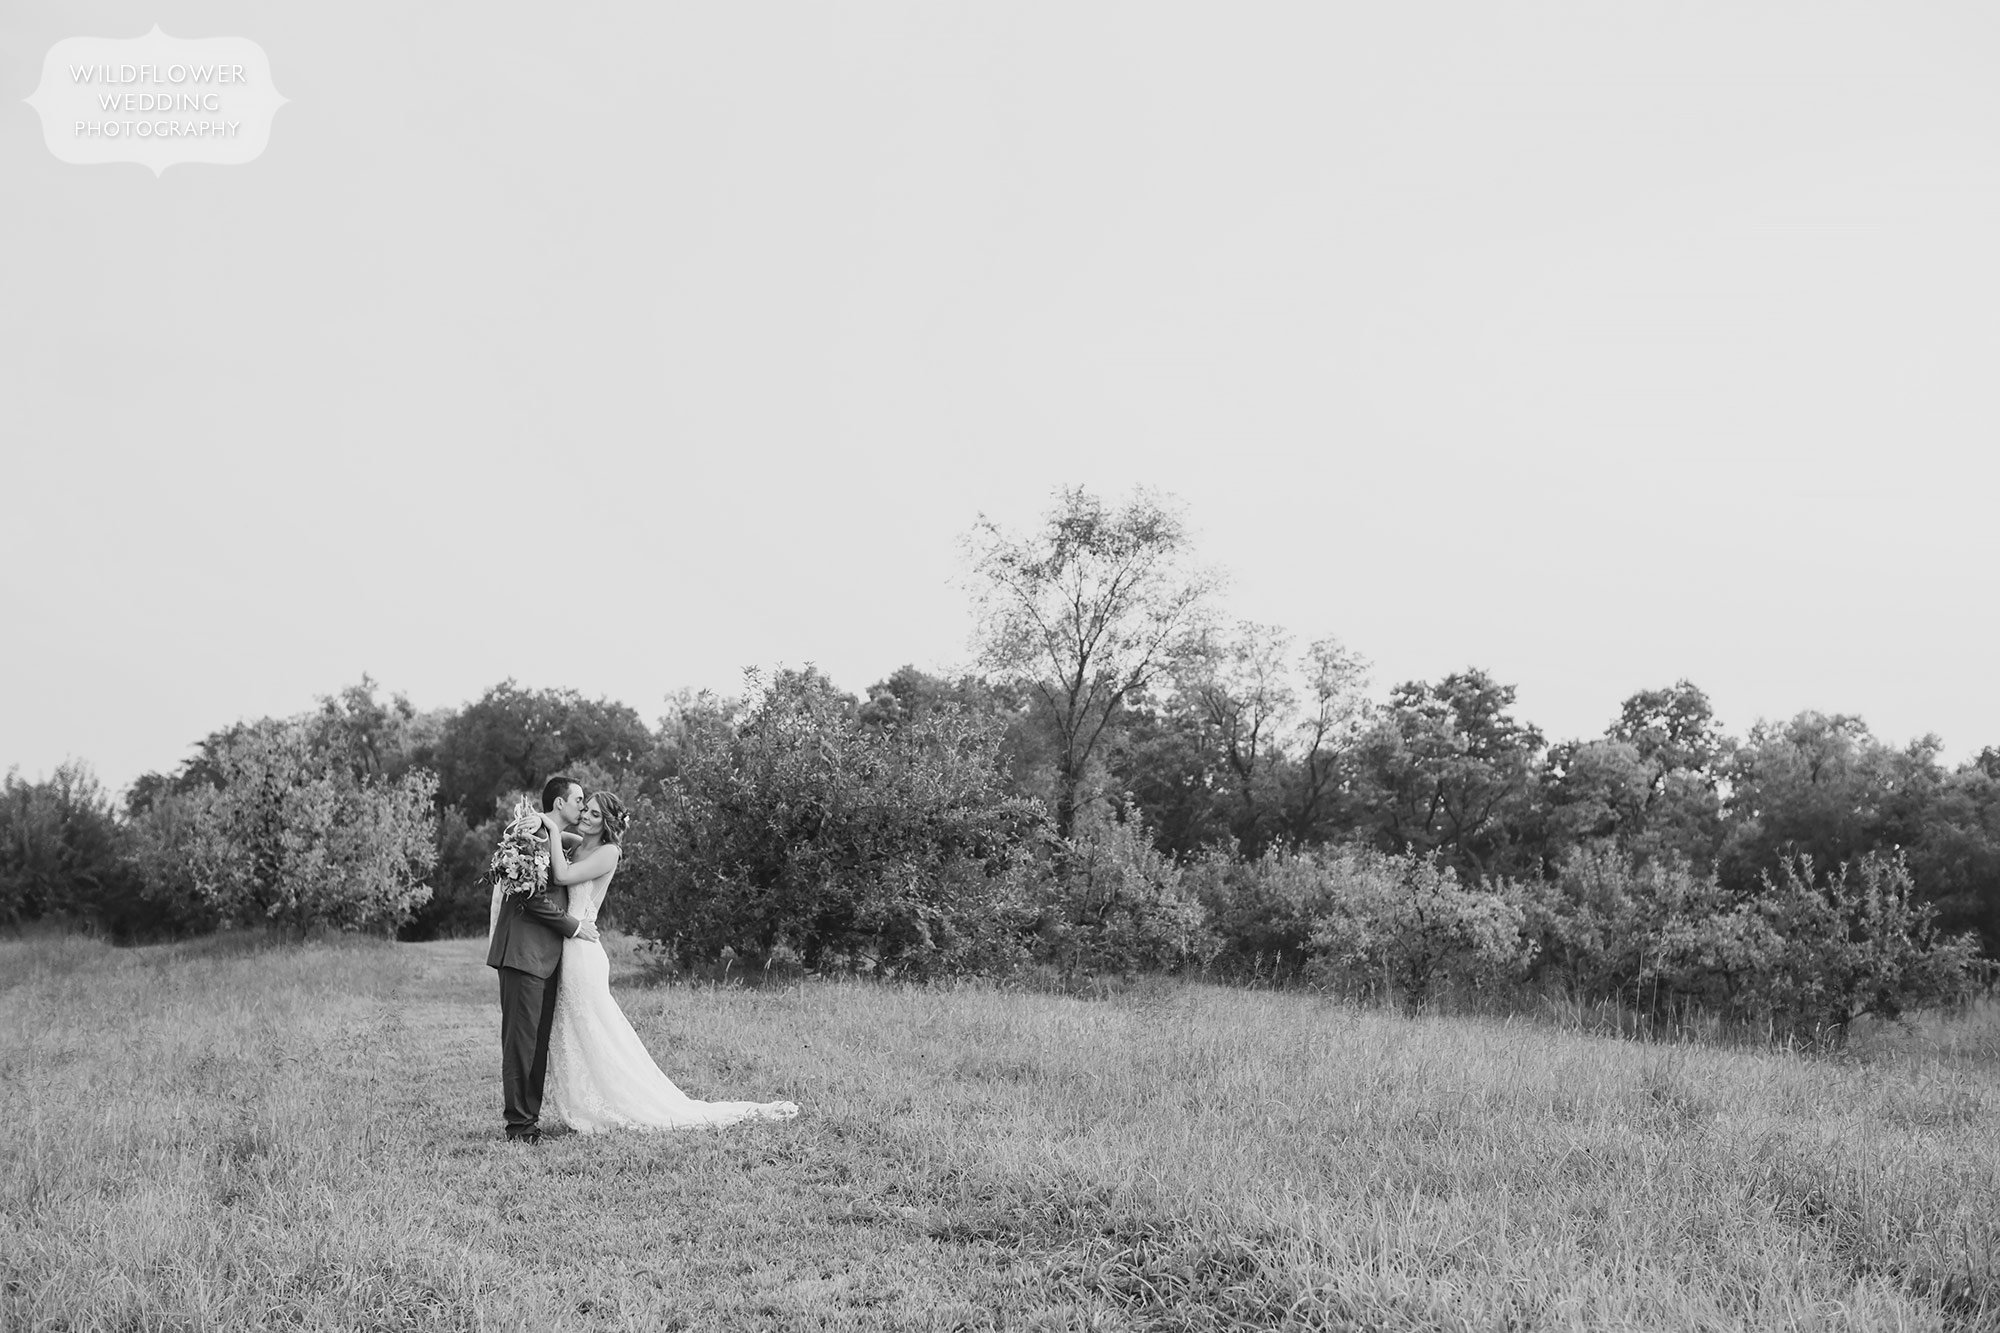 Artistic wedding photography in black and white of the bride and groom hugging in a field at the Weston Red Barn Farm.